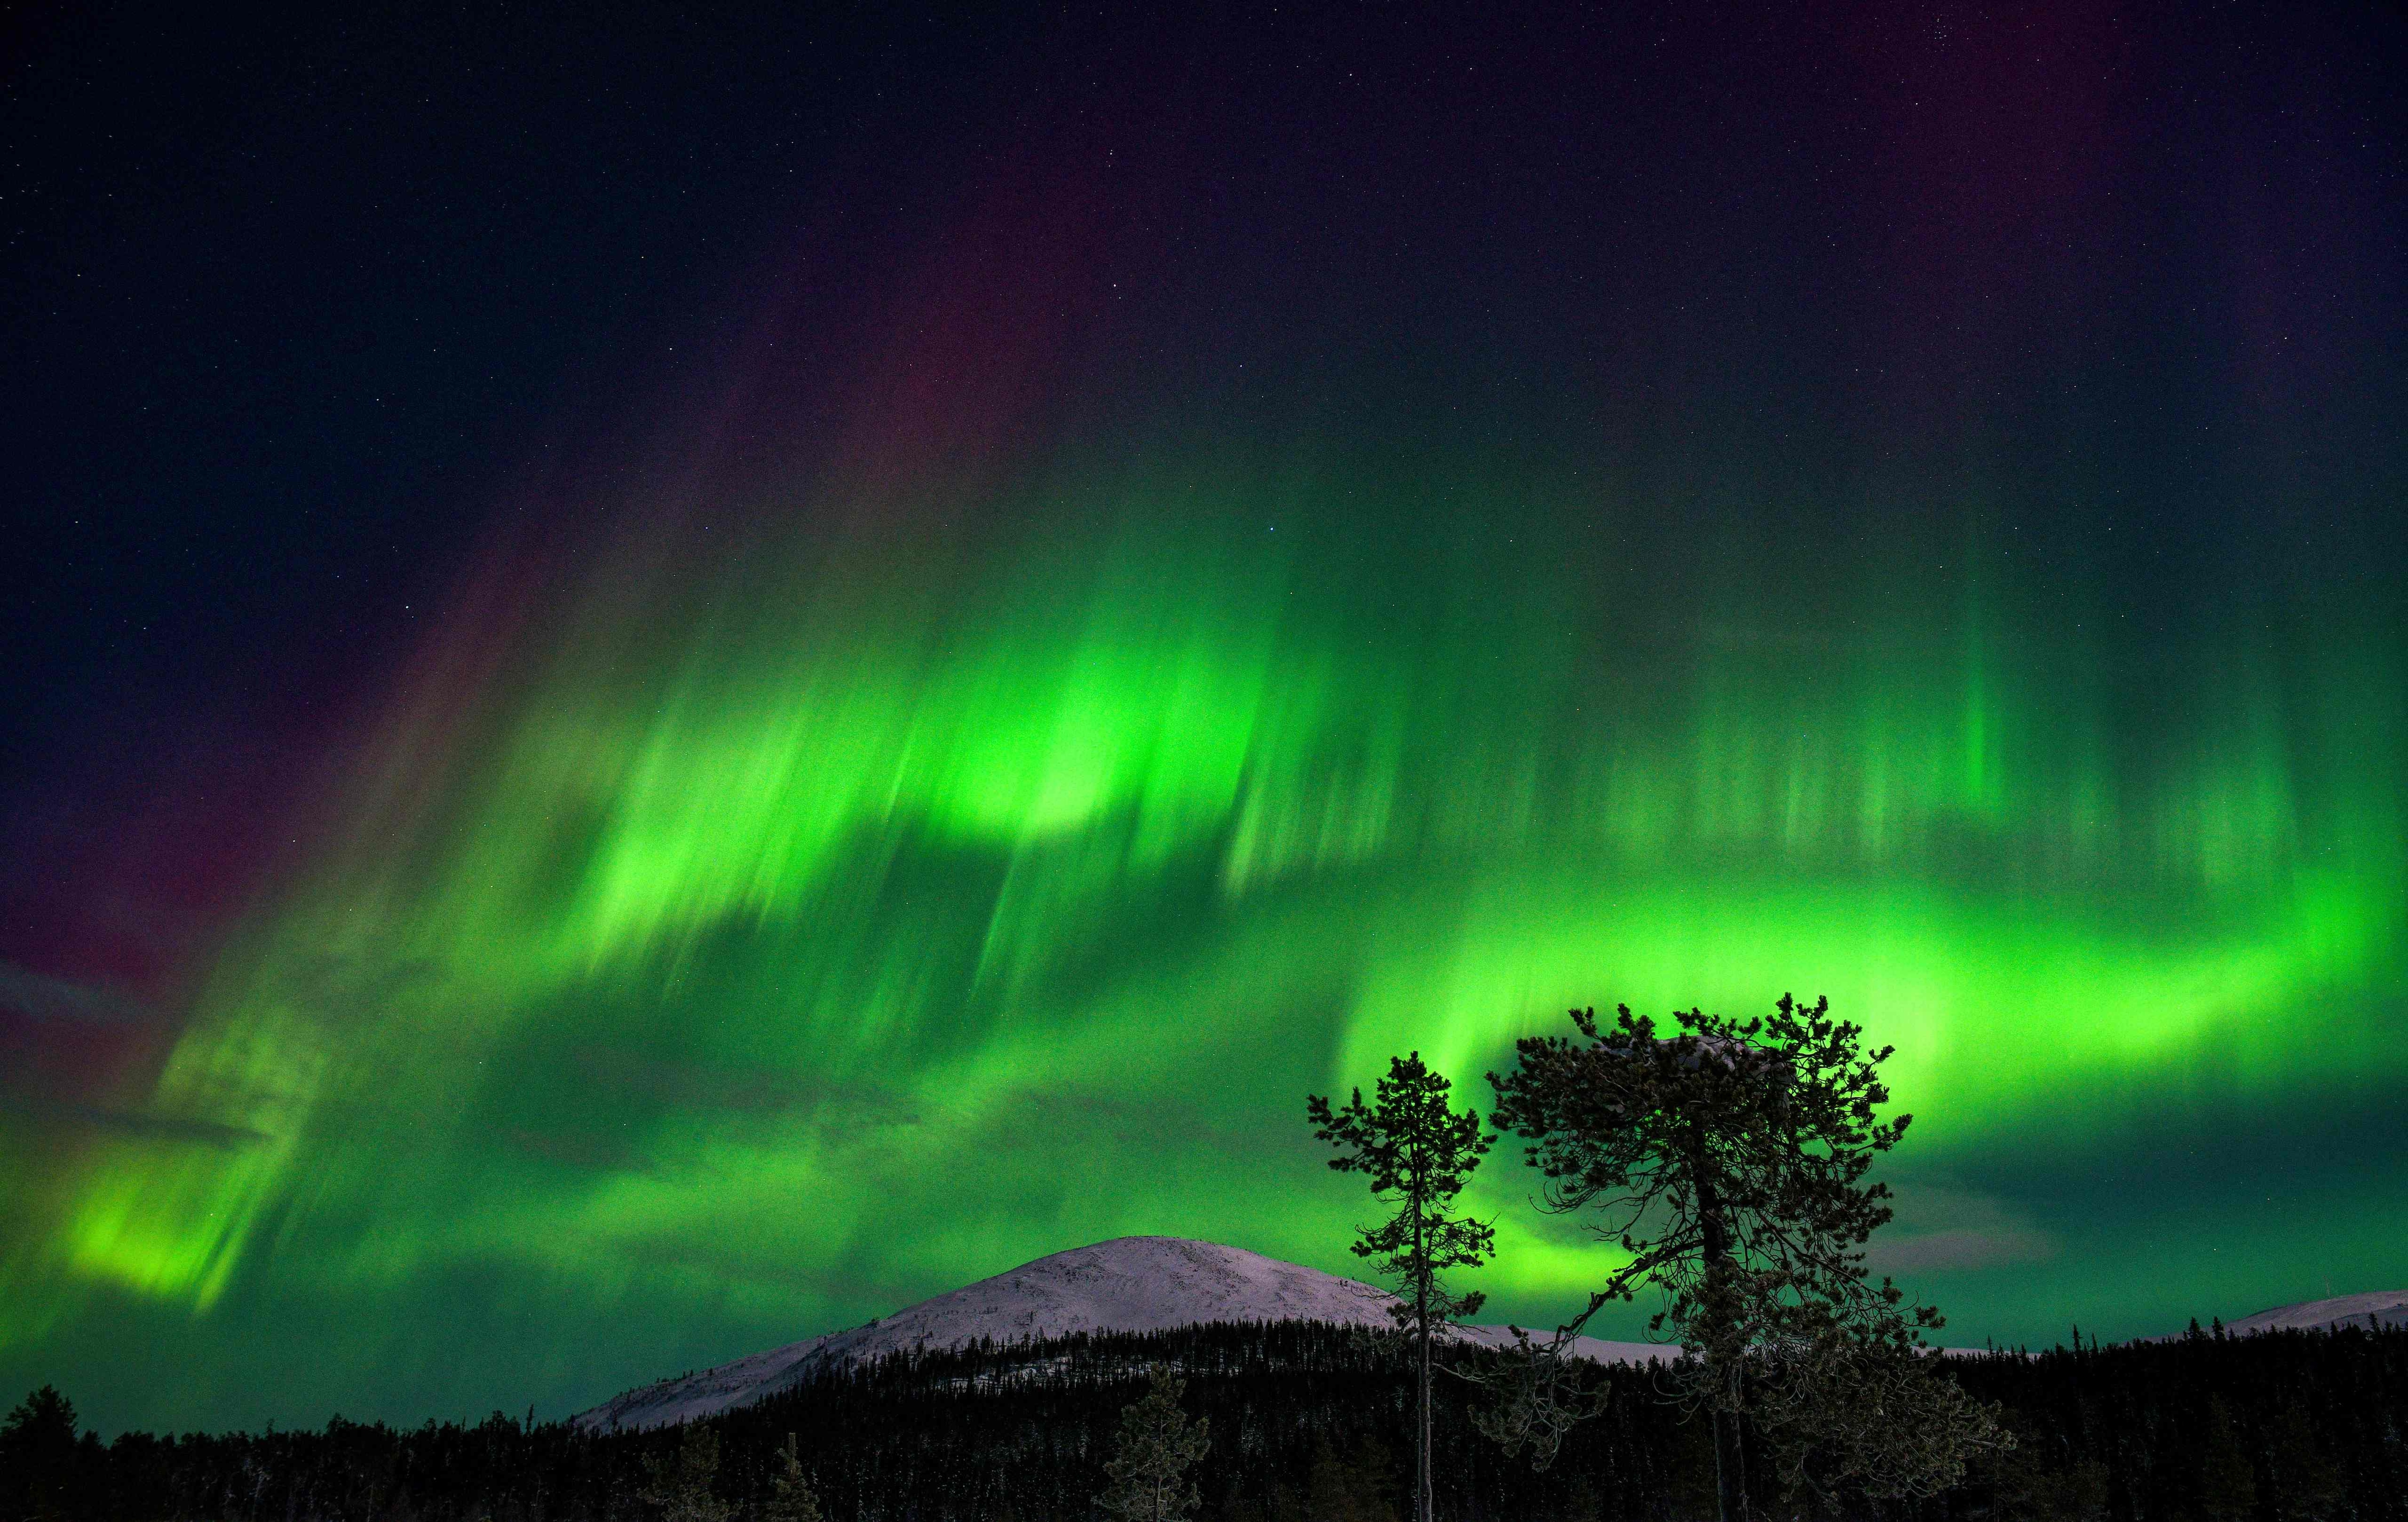 In Pics: What are Northern lights? 5 facts about this stunning Aurora  phenomenon | Photos